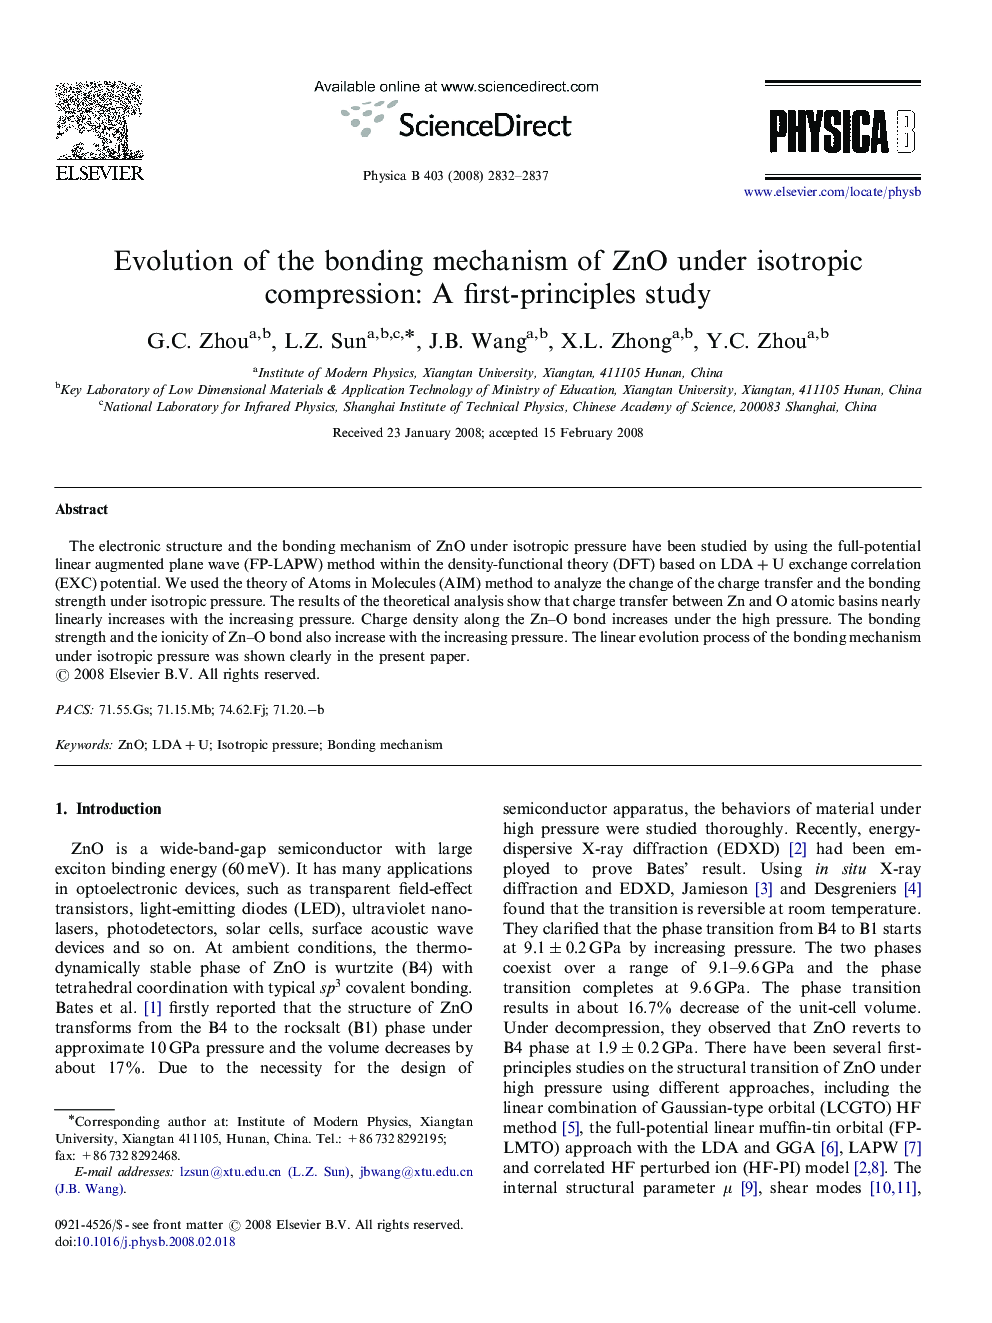 Evolution of the bonding mechanism of ZnO under isotropic compression: A first-principles study